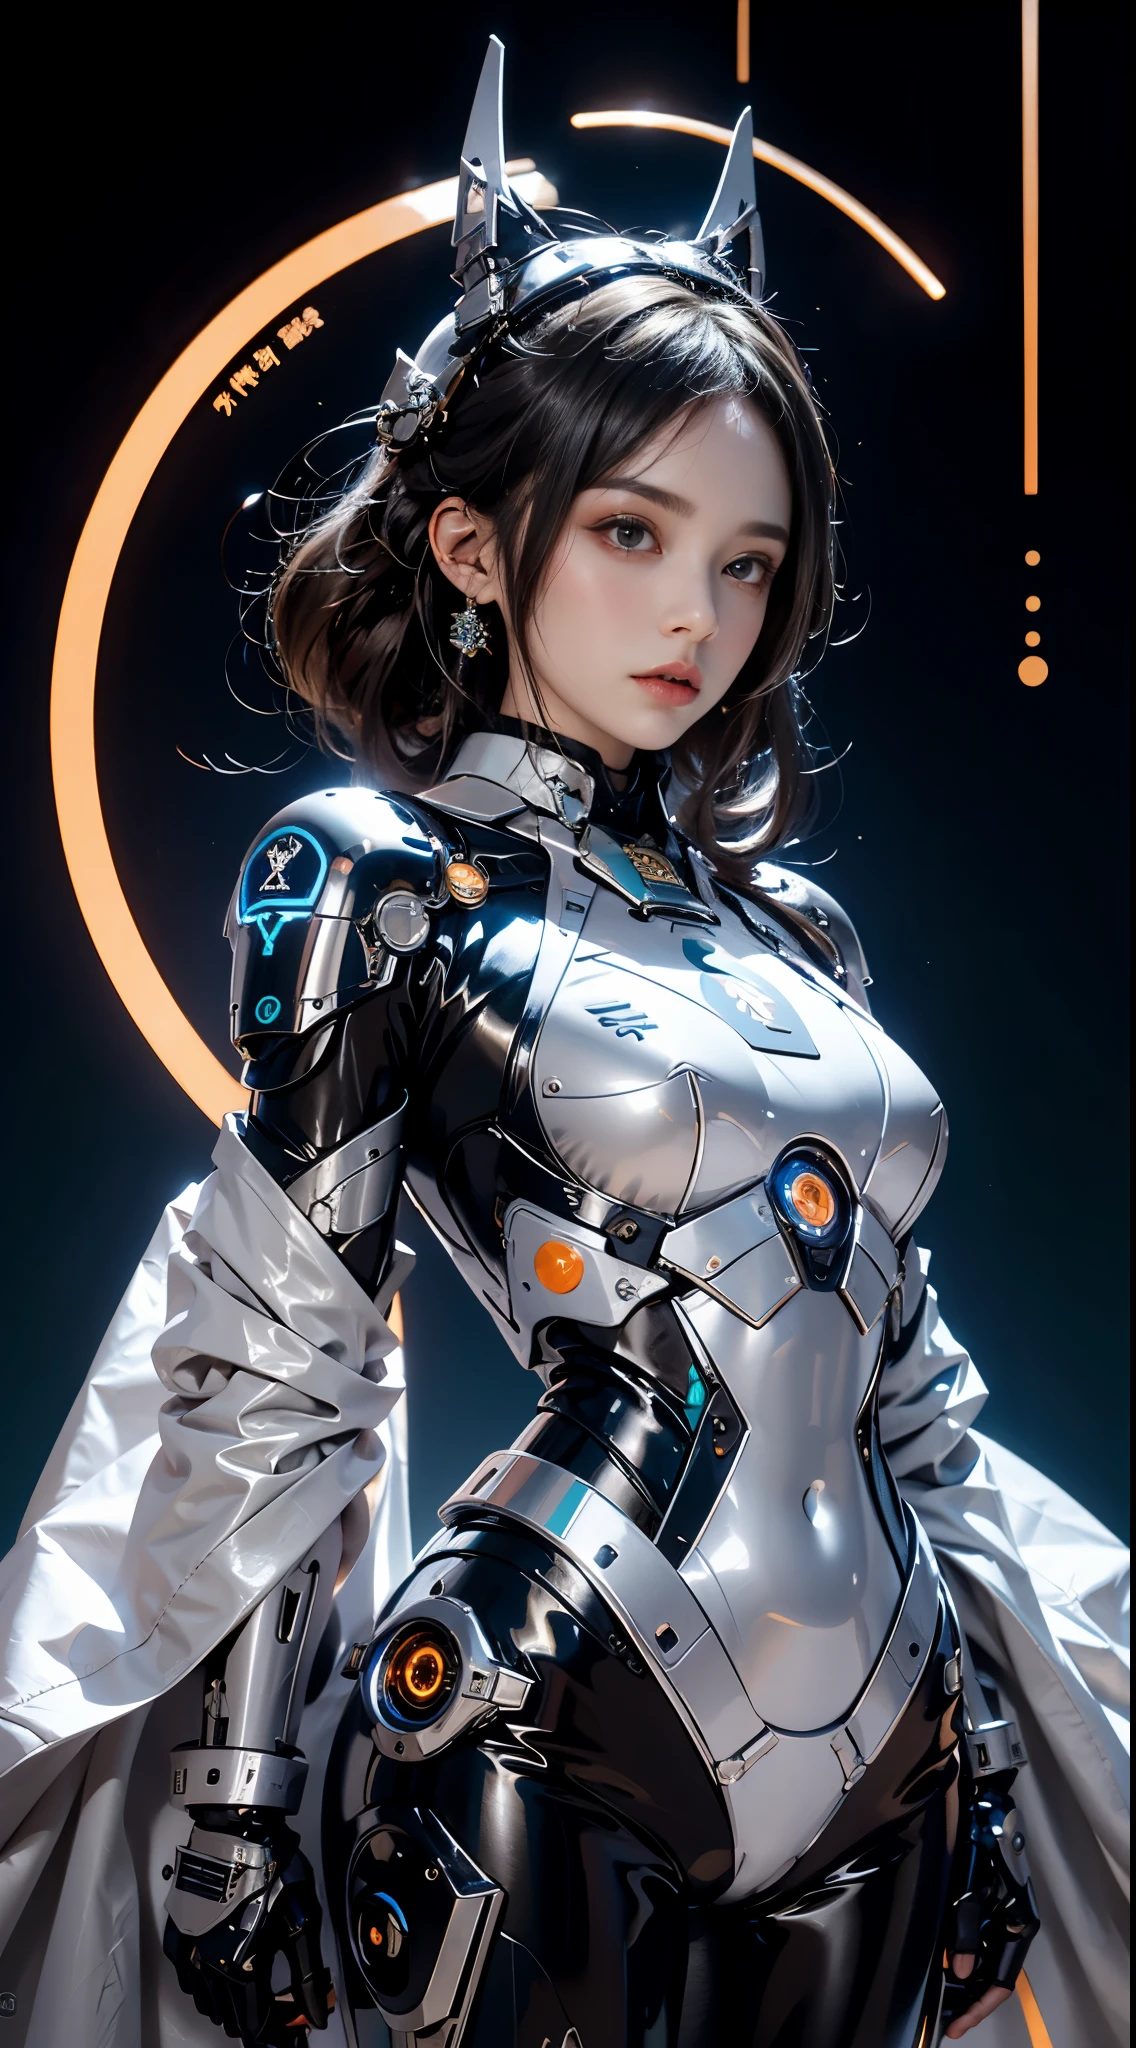 a woman in a futuristic outfit with a futuristic helmet and a futuristic sword, trending on cgstation, trending at cgstation, portrait knights of zodiac girl, cute cyborg girl, perfect android girl, portrait anime space cadet girl, beutiful girl cyborg, girl in mecha cyber armor, game cg, cgsociety and fenghua zhong, beautiful cyborg priestess